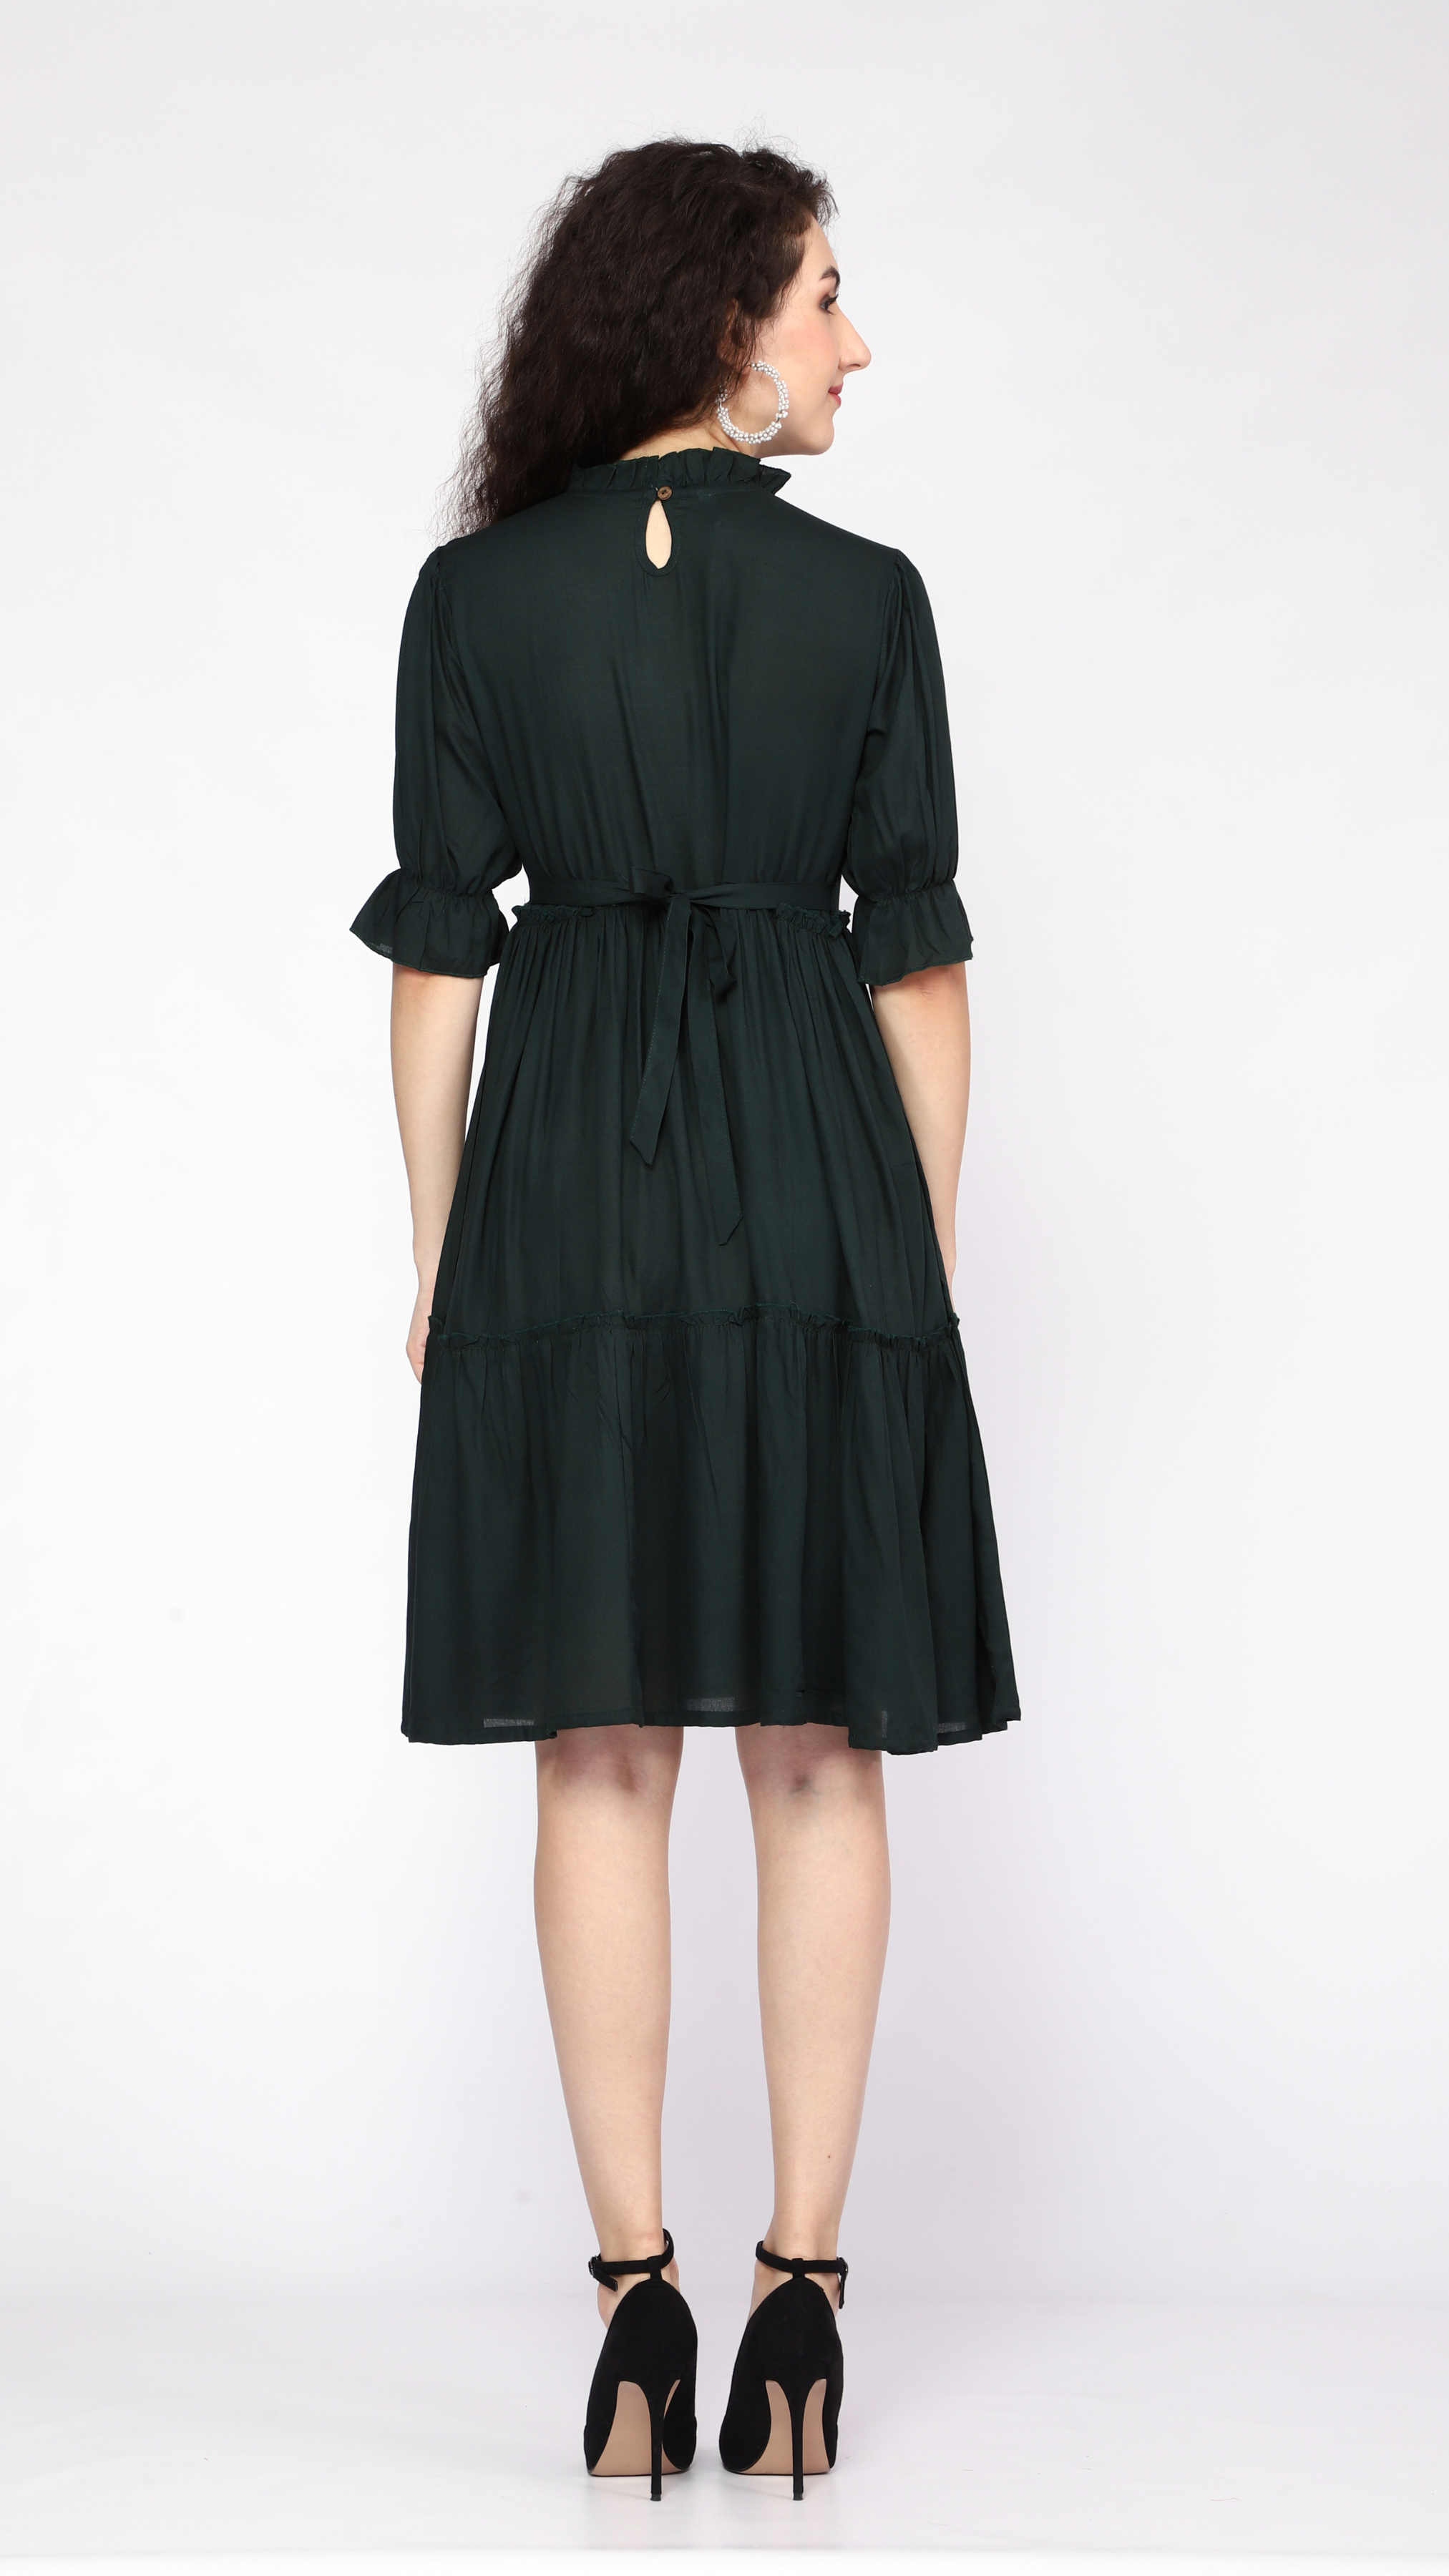 Solid Fit and Flare Dress: Calf-Length